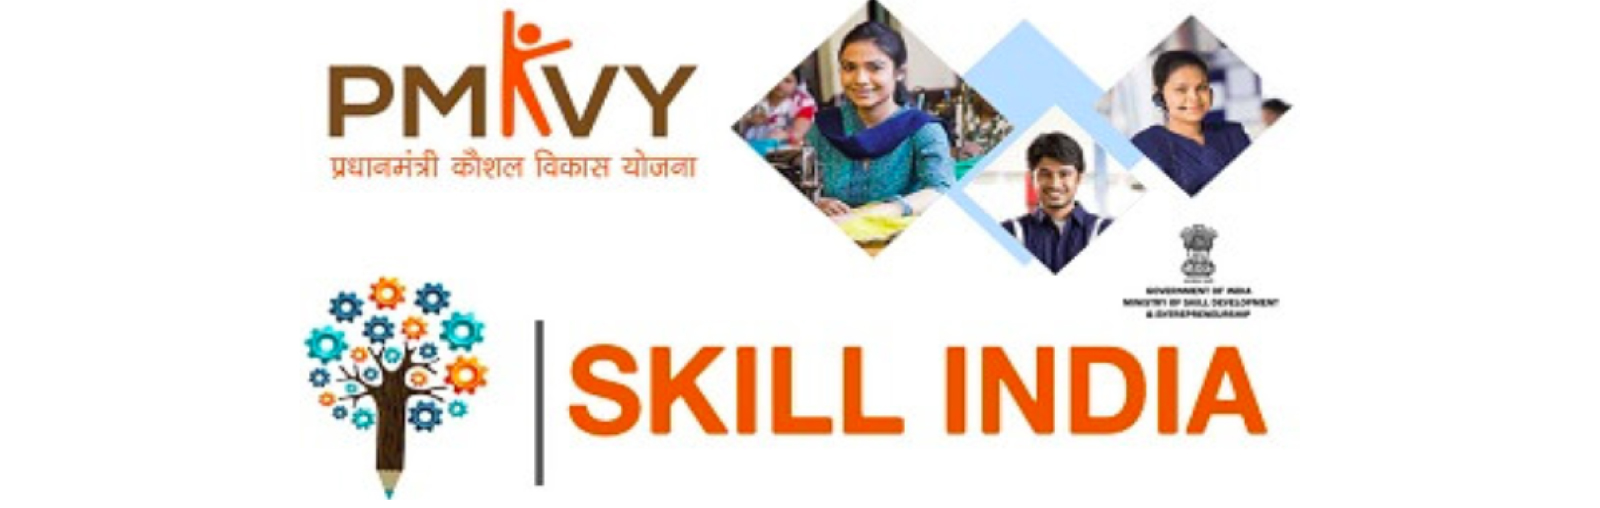 Government plans to train over 10 million youth under skills and  development initiative - India Today